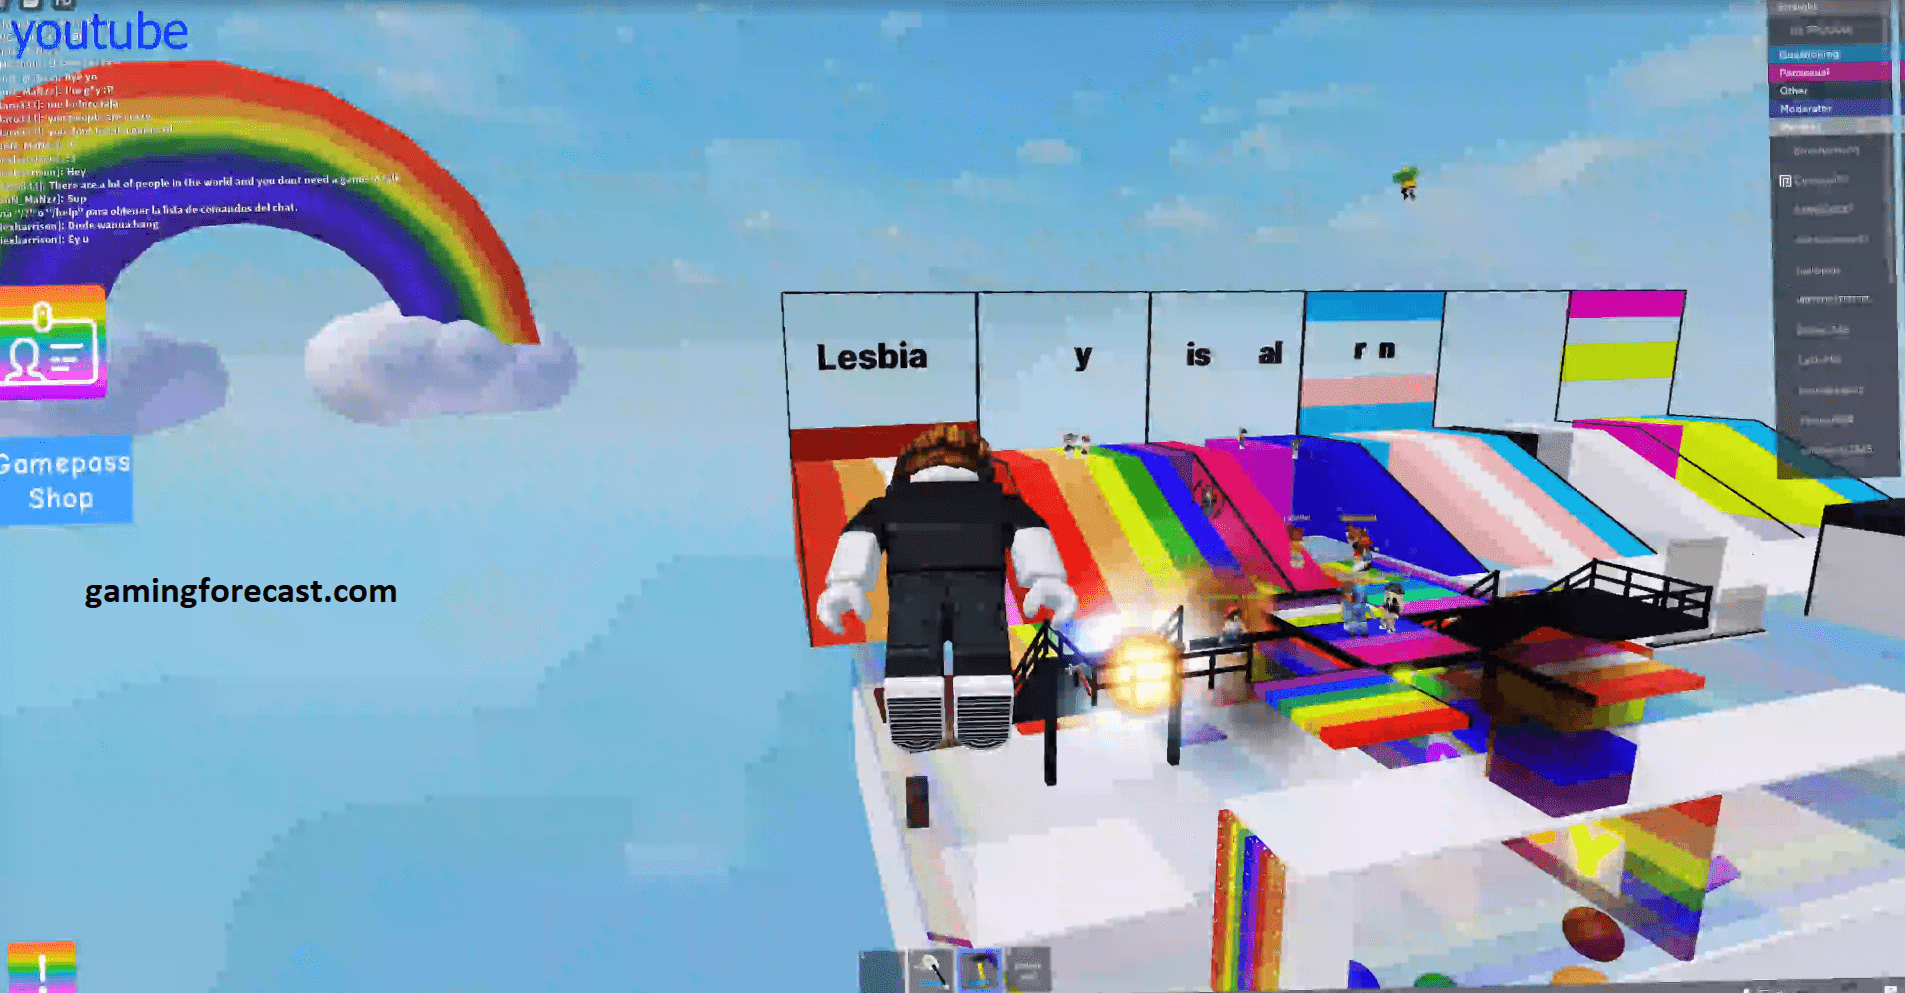 Roblox Hack Download Pc Destroy Lobby Fly Aimbot Scripts 2021 Gaming Forecast Download Free Online Game Hacks - roblox account hacker.exe